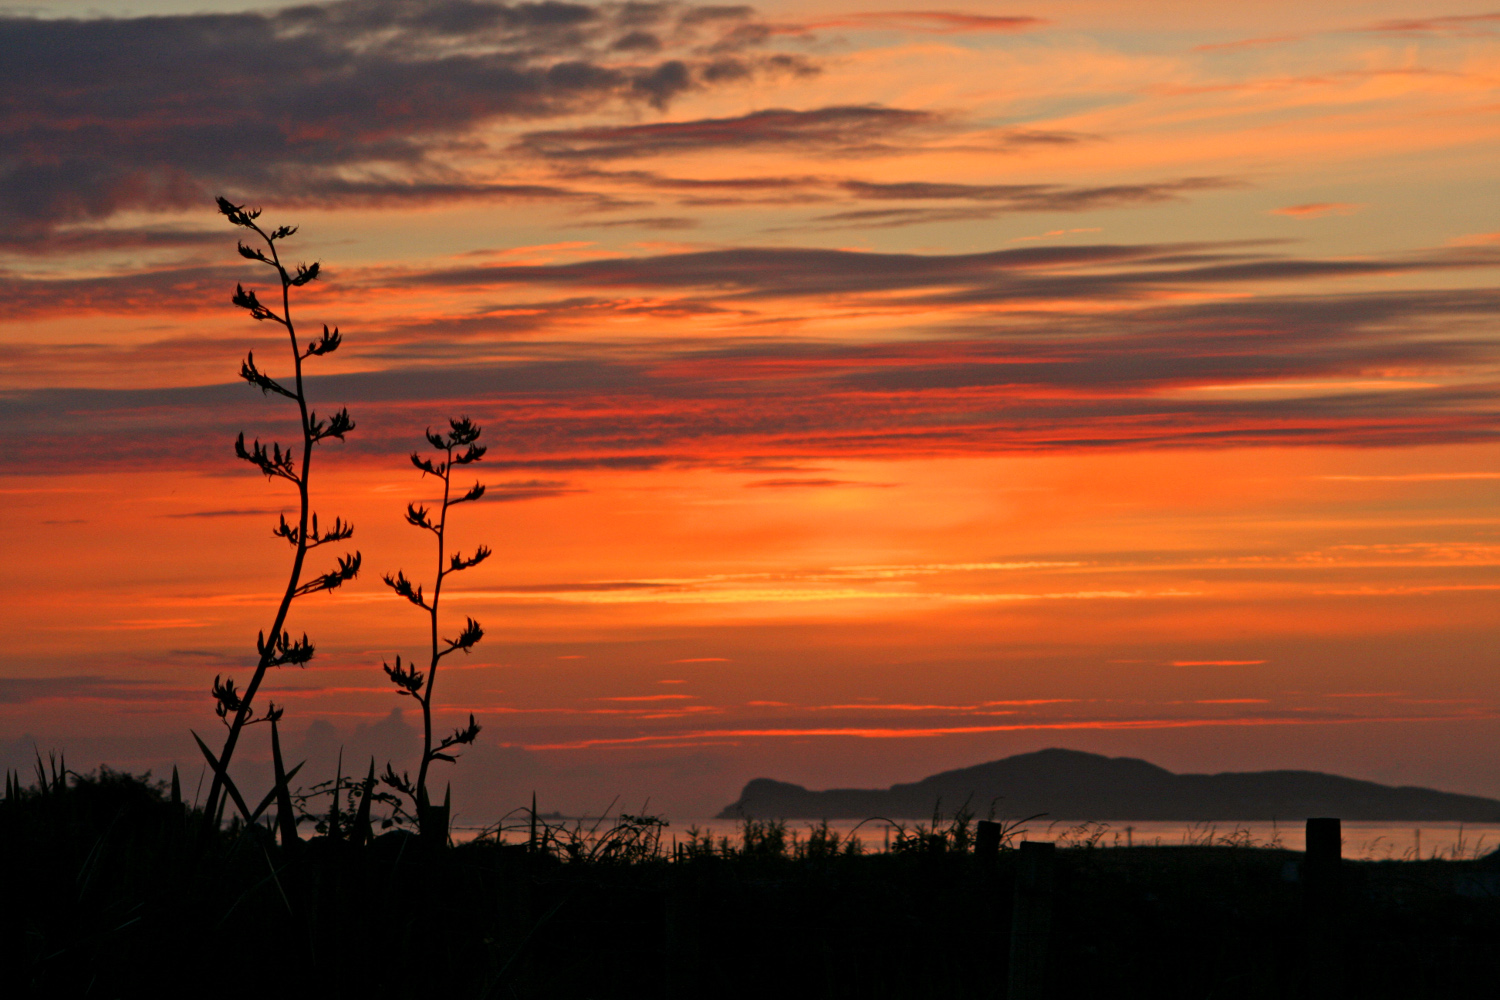 Sunset over Inishbofin, seen from Cleggan. Image by Bert Kaufman / CC BY-SA 2.0